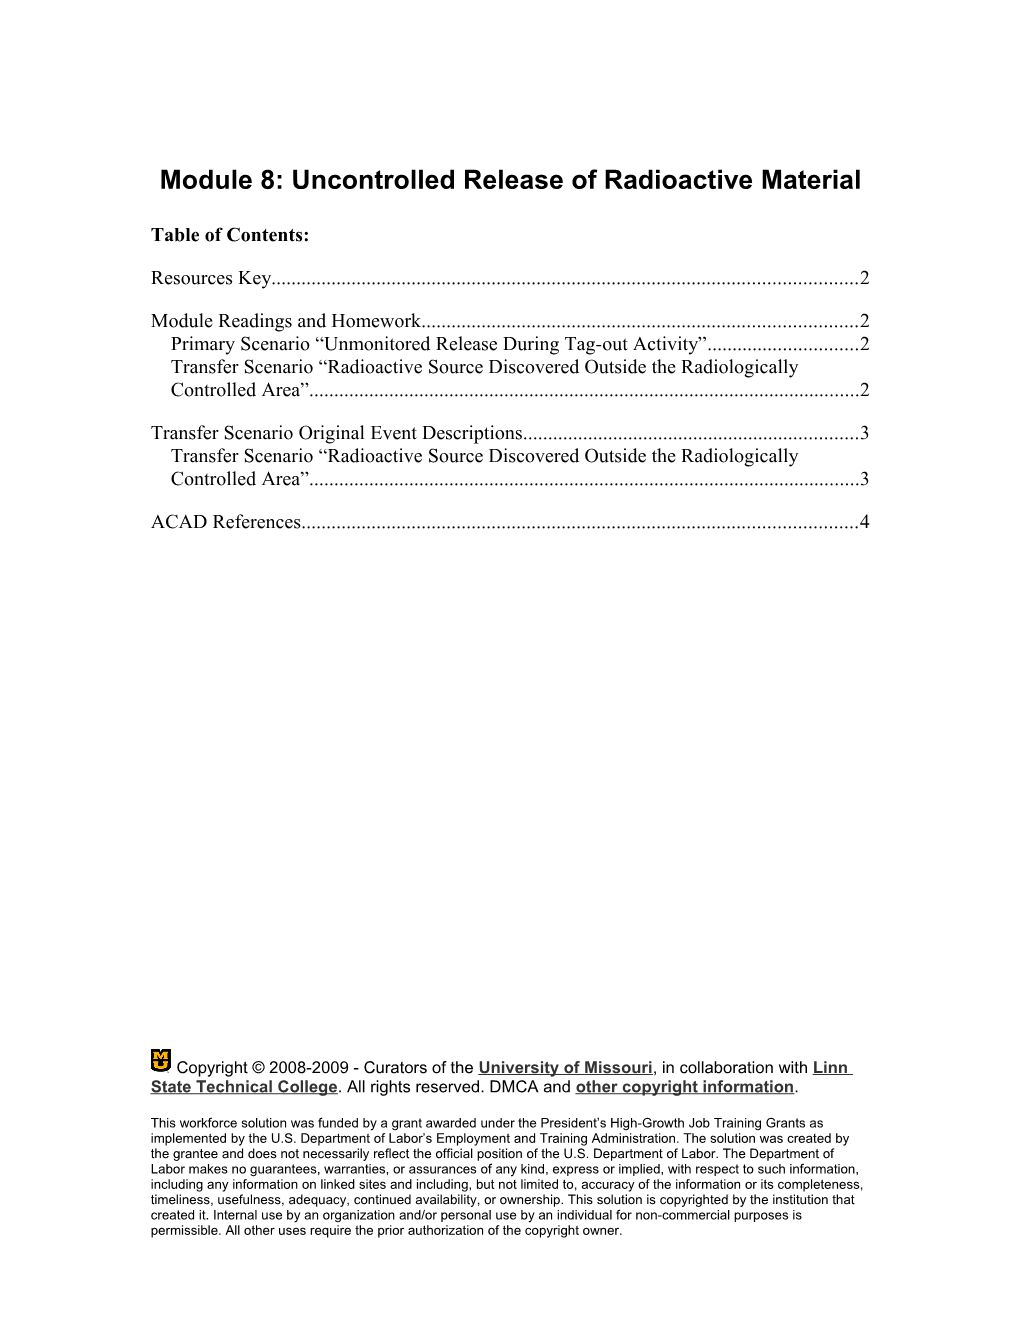 Module 8: Uncontrolled Release of Radioactive Material